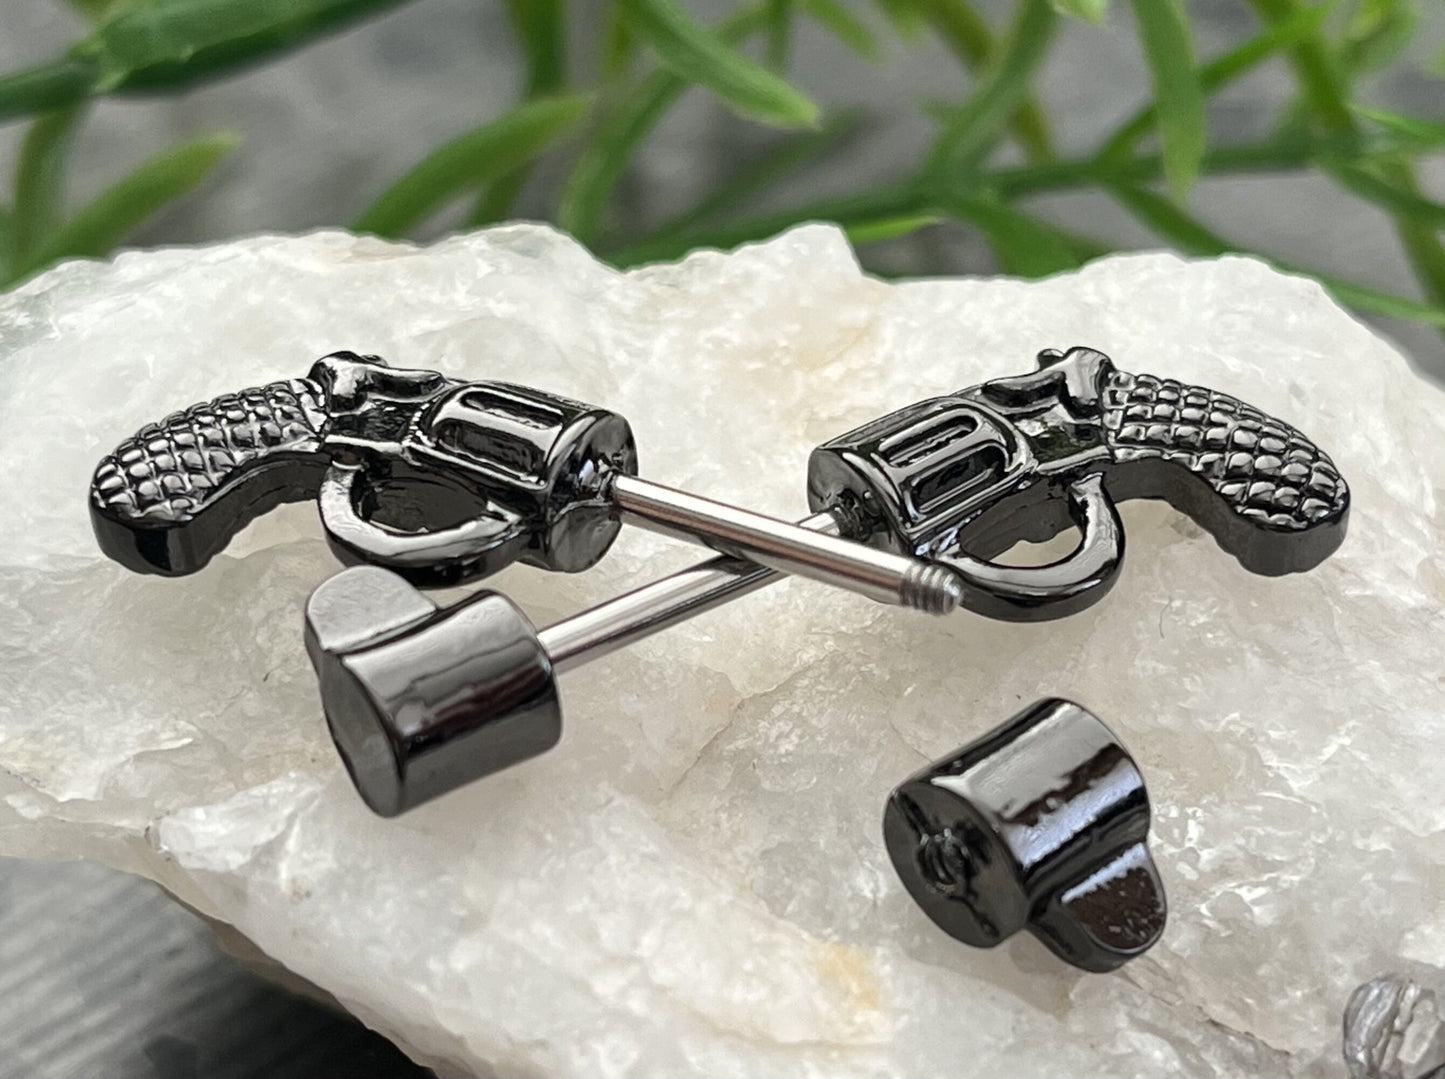 PAIR of Striking Revolver Pistol Gun Shaped Nipple Barbells/Rings - 14g - Wearable Length - 12mm - Black, Gold and Silver Available!